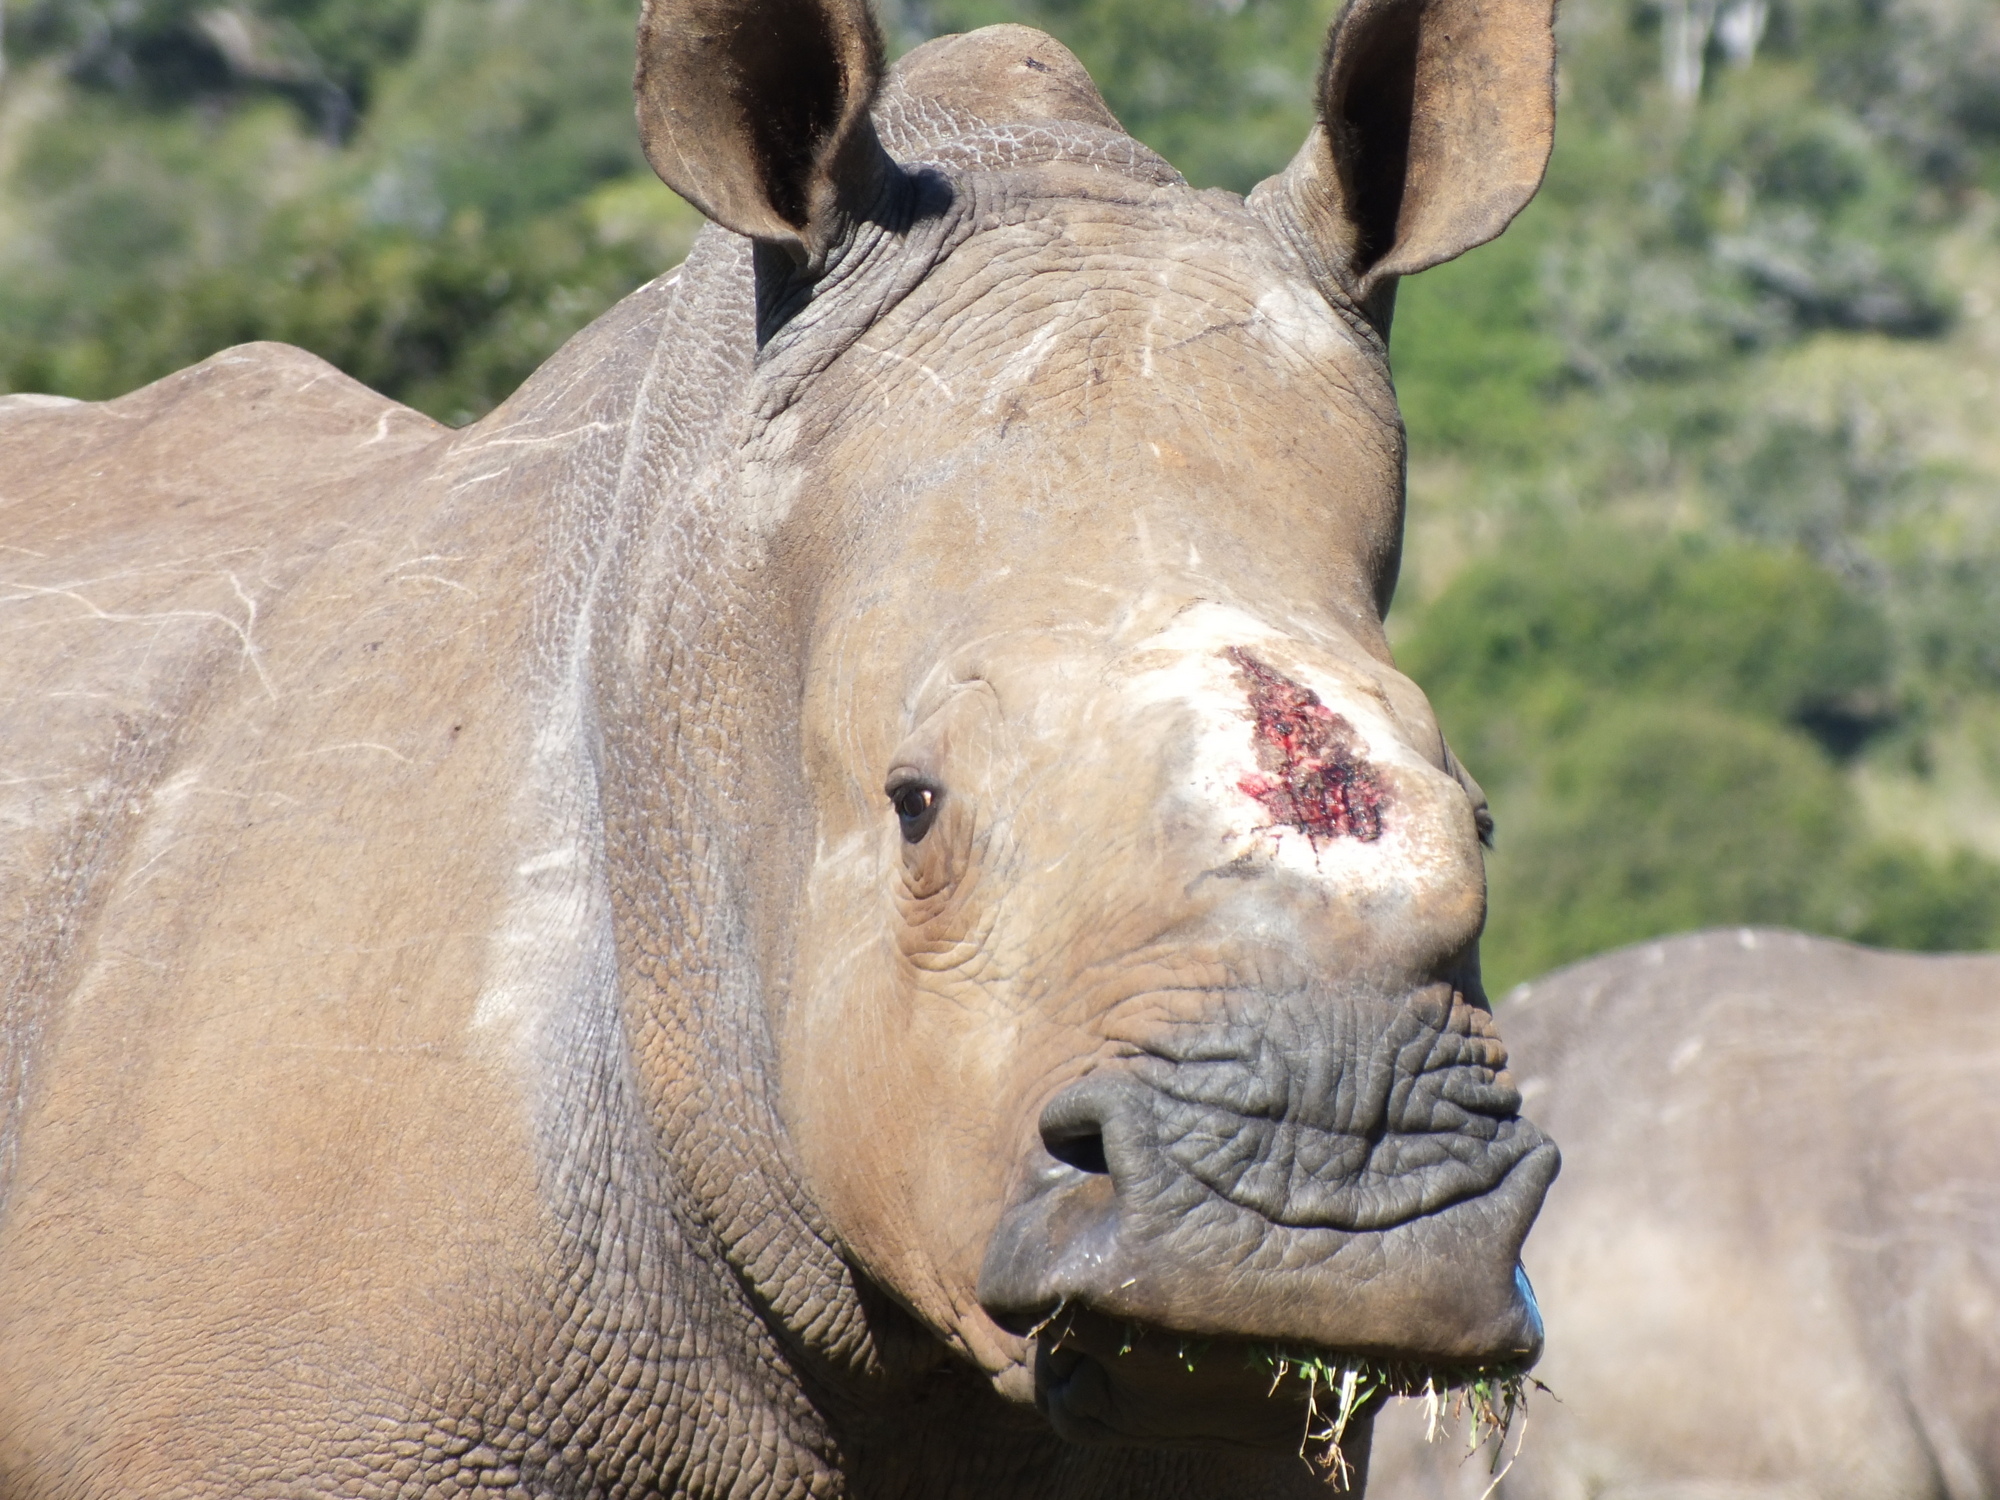 White rhino Thandi with horn removed by poachers